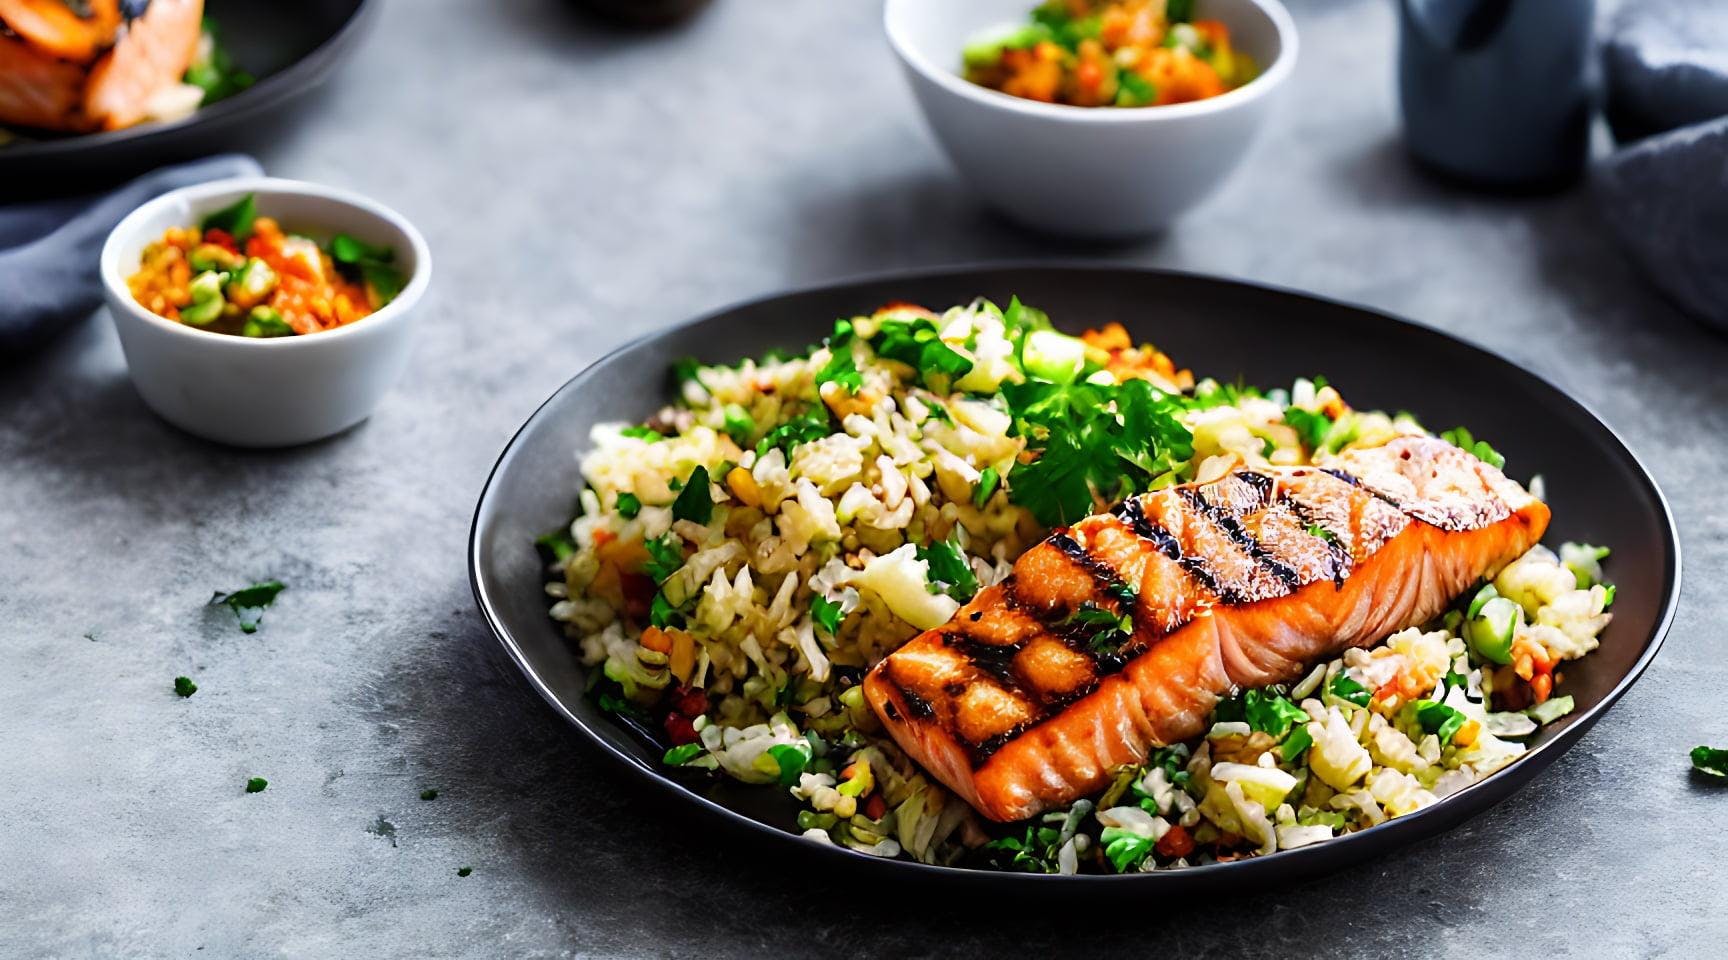 Photo Of Grilled Salmon Filet On Fried Rice With Coriander